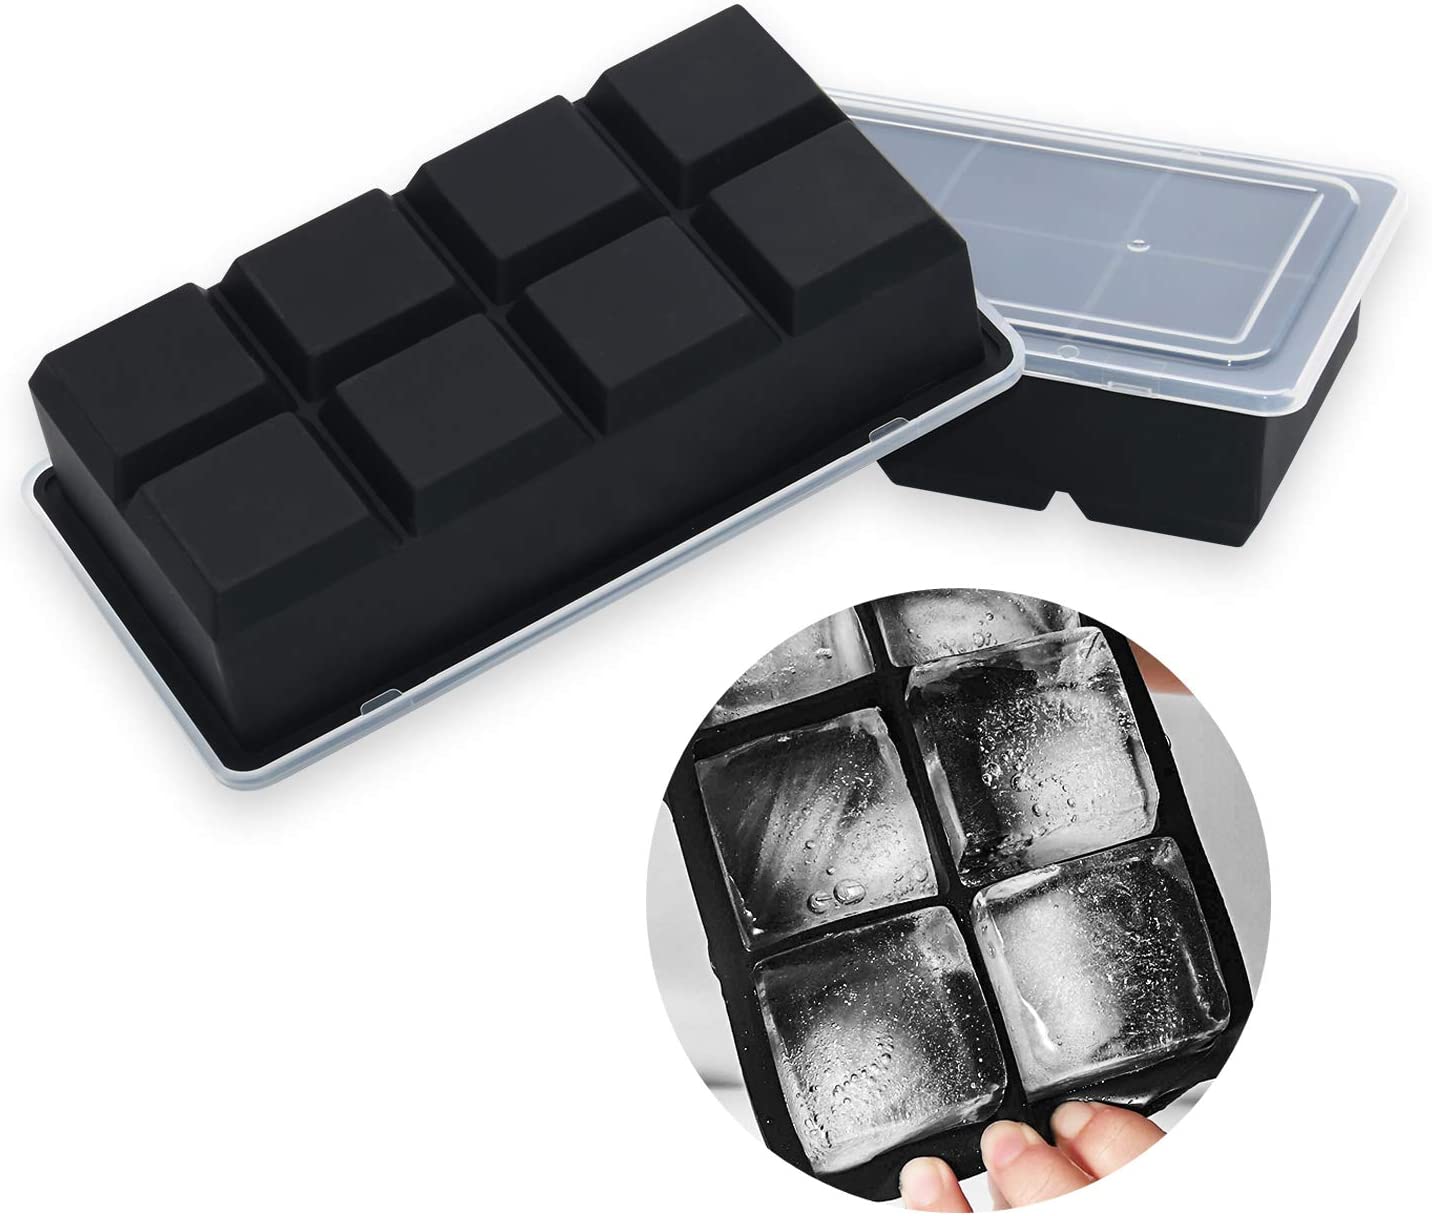 Treamon Large Ice Cube Trays for Cocktails 4 Pack - Silicone Ice Cube Mold for Whiskey, Easy Release Reusable Molds with Removable Lids for Making 24 Pcs Large Ice Cubes (Black)